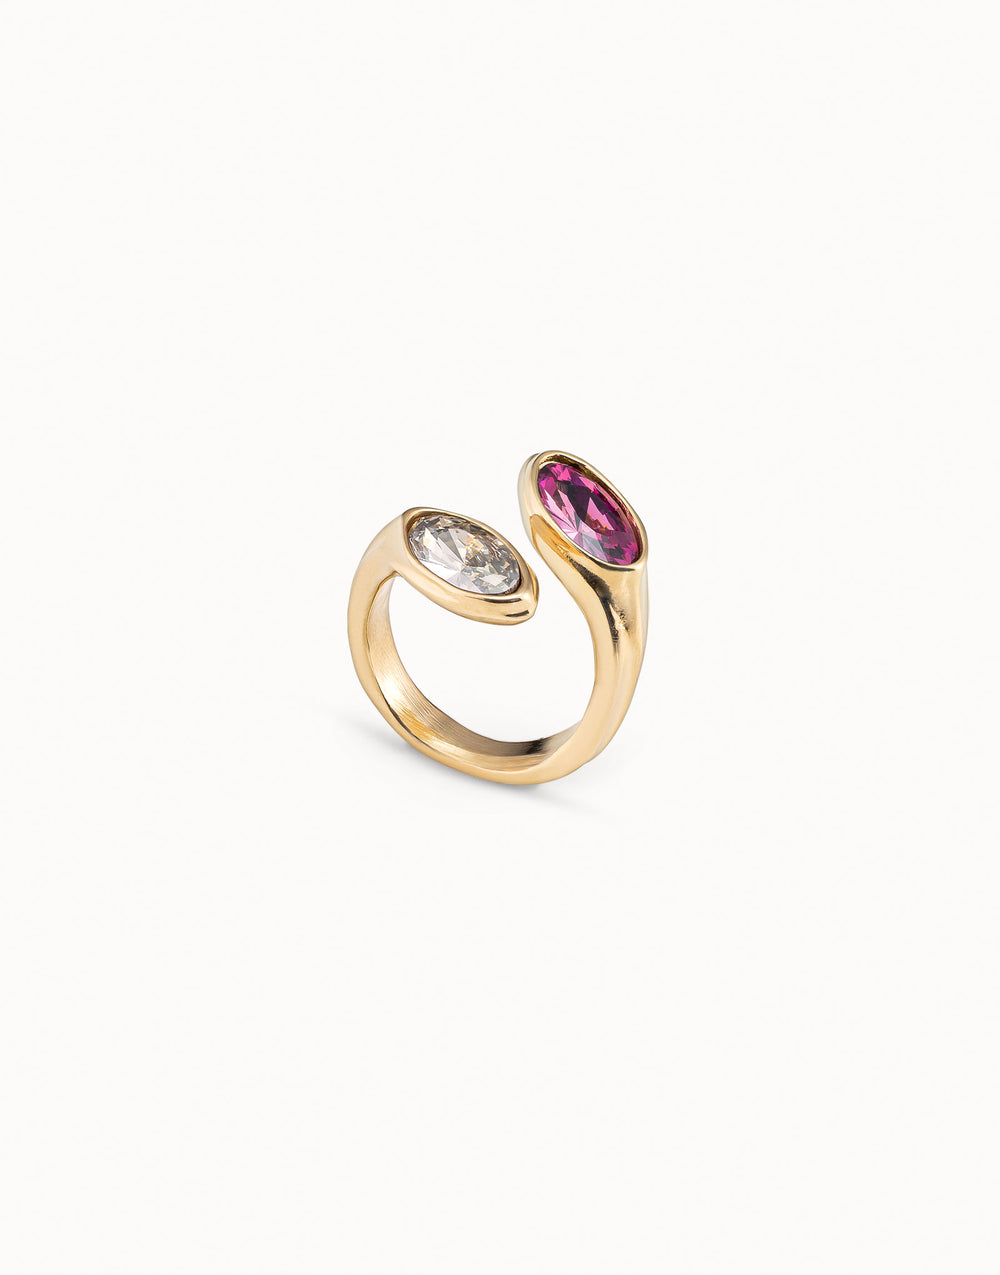 SPRING RING - GOLD - Kingfisher Road - Online Boutique